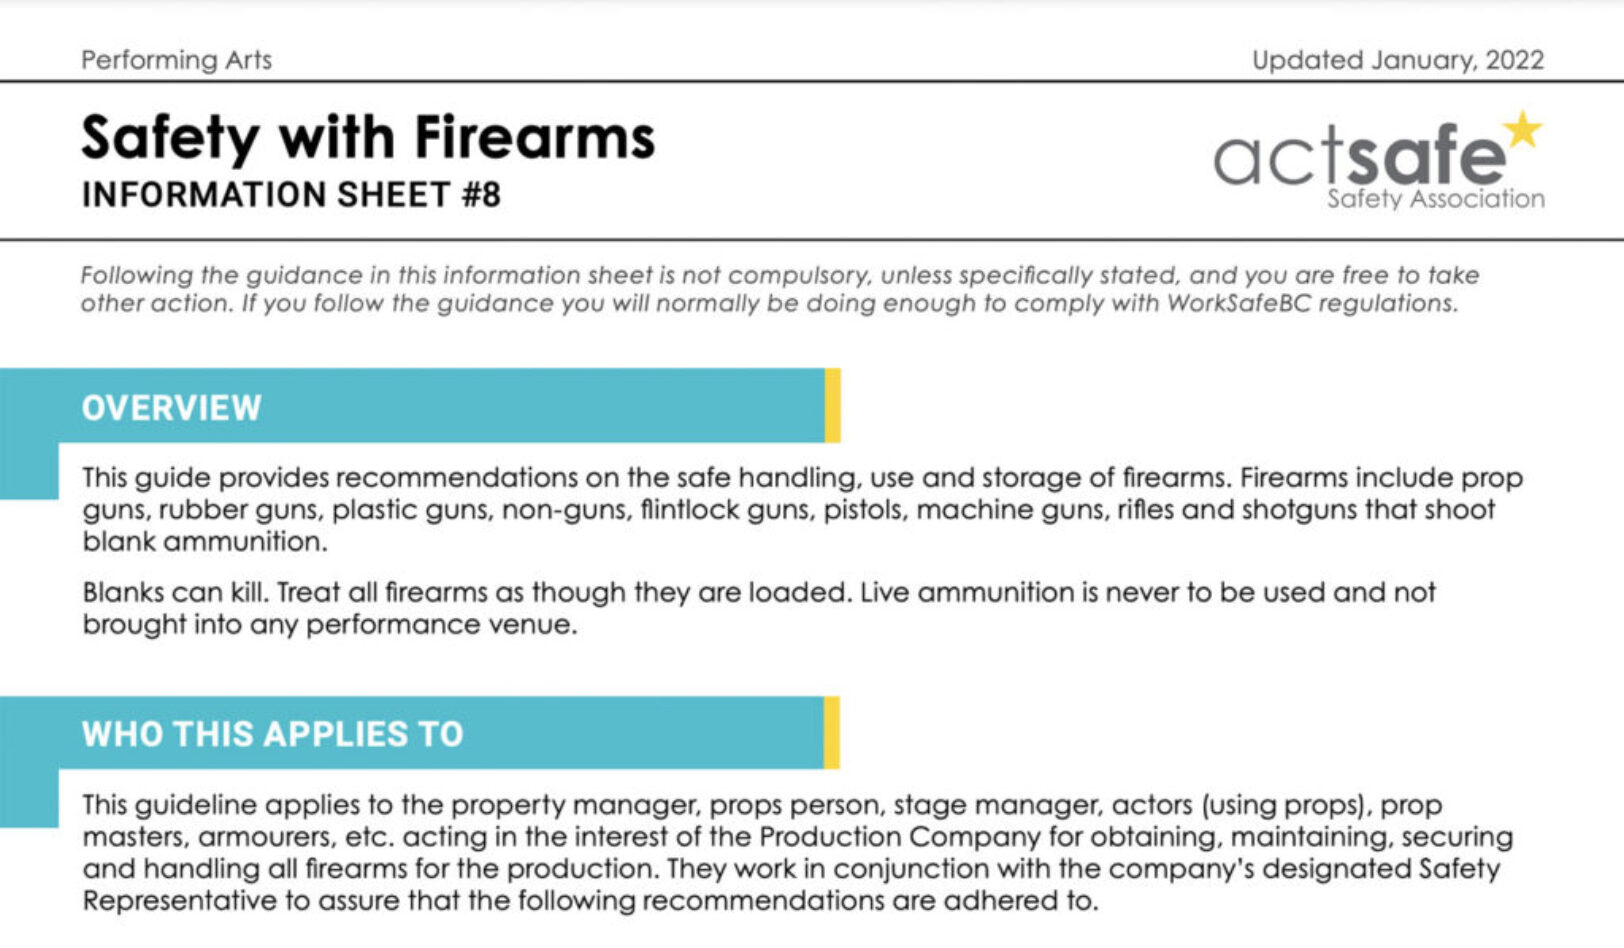 #8 Safety With Firearms Performing Arts Information Sheet